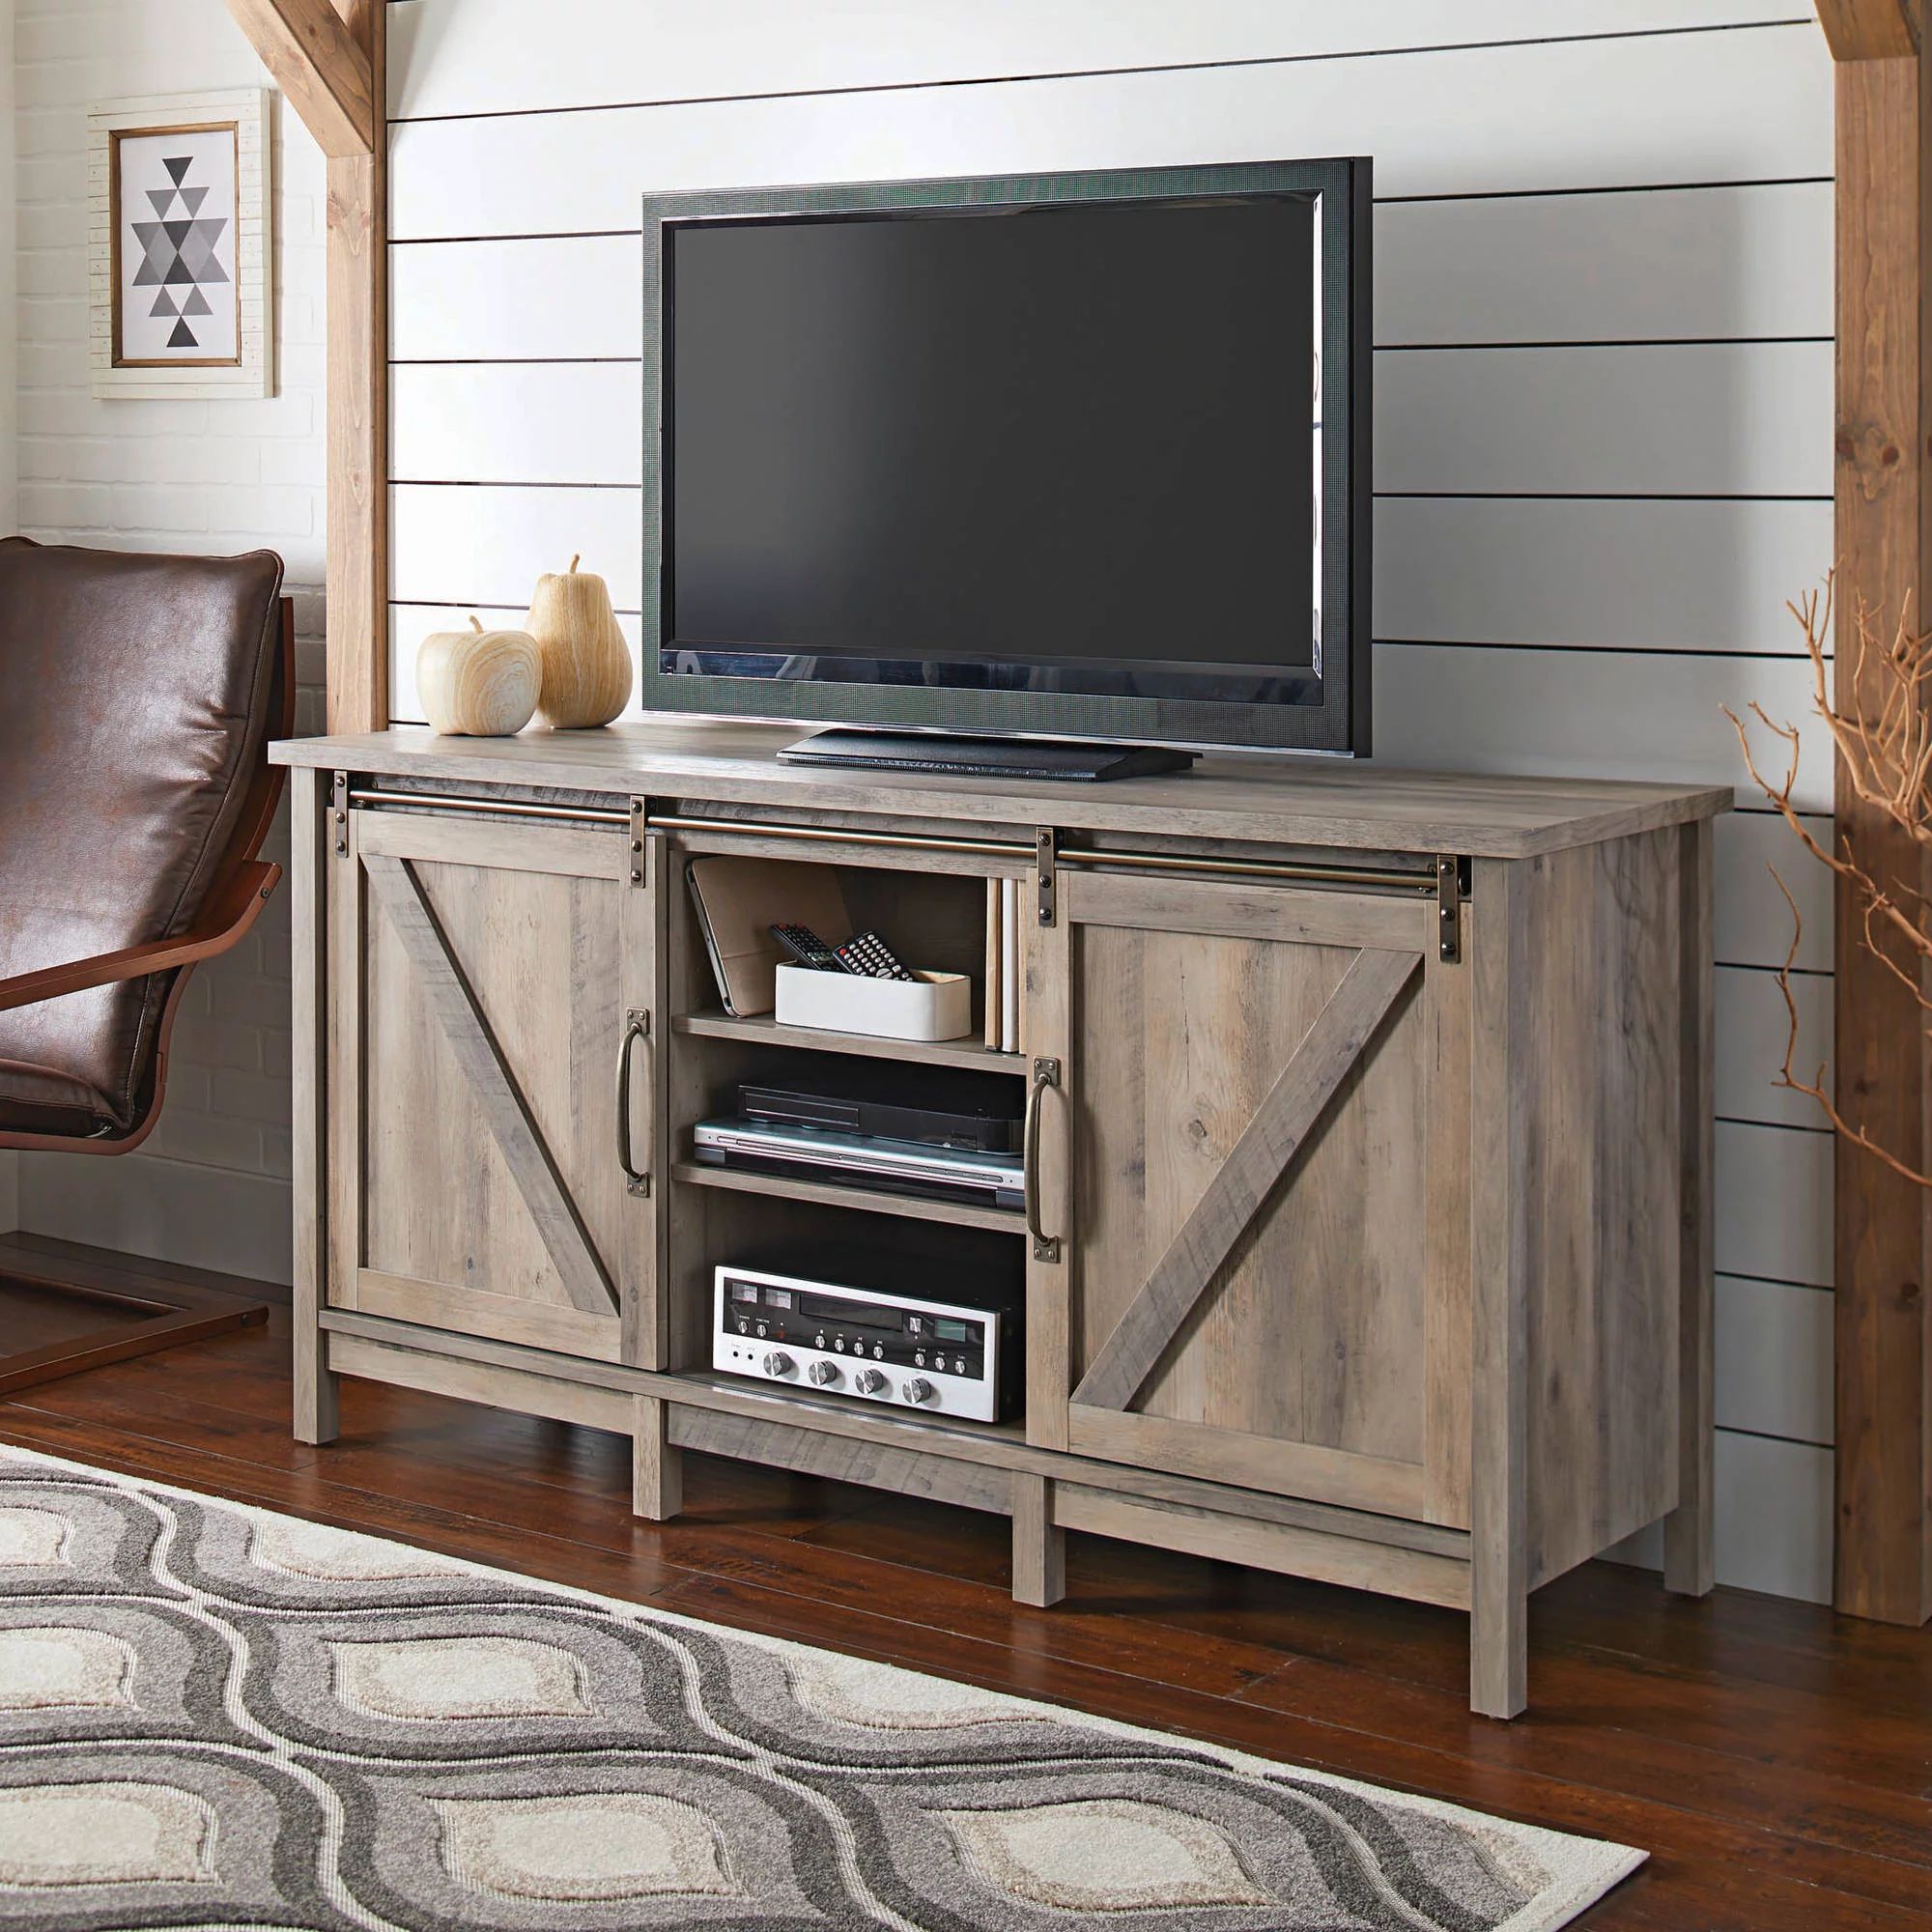 Better Homes & Gardens Modern Farmhouse TV Stand for TVs up to 70", Rustic Gray Finish | Walmart (US)